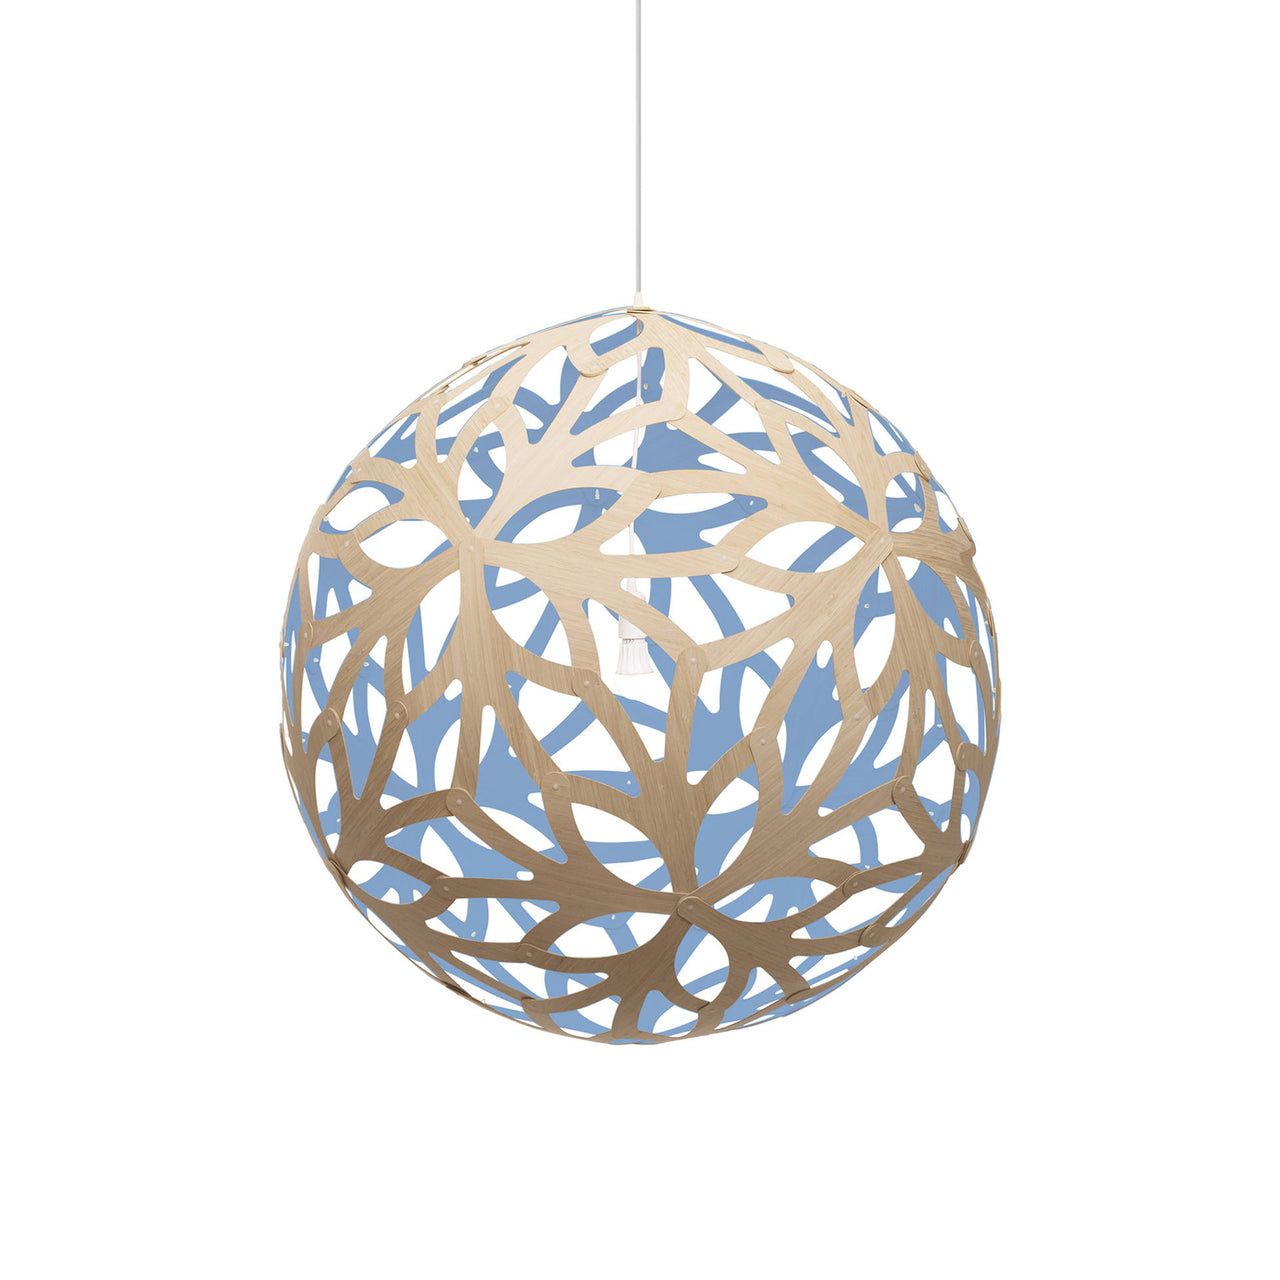 Floral Pendant Light: Extra Large + Bamboo + Blue + White